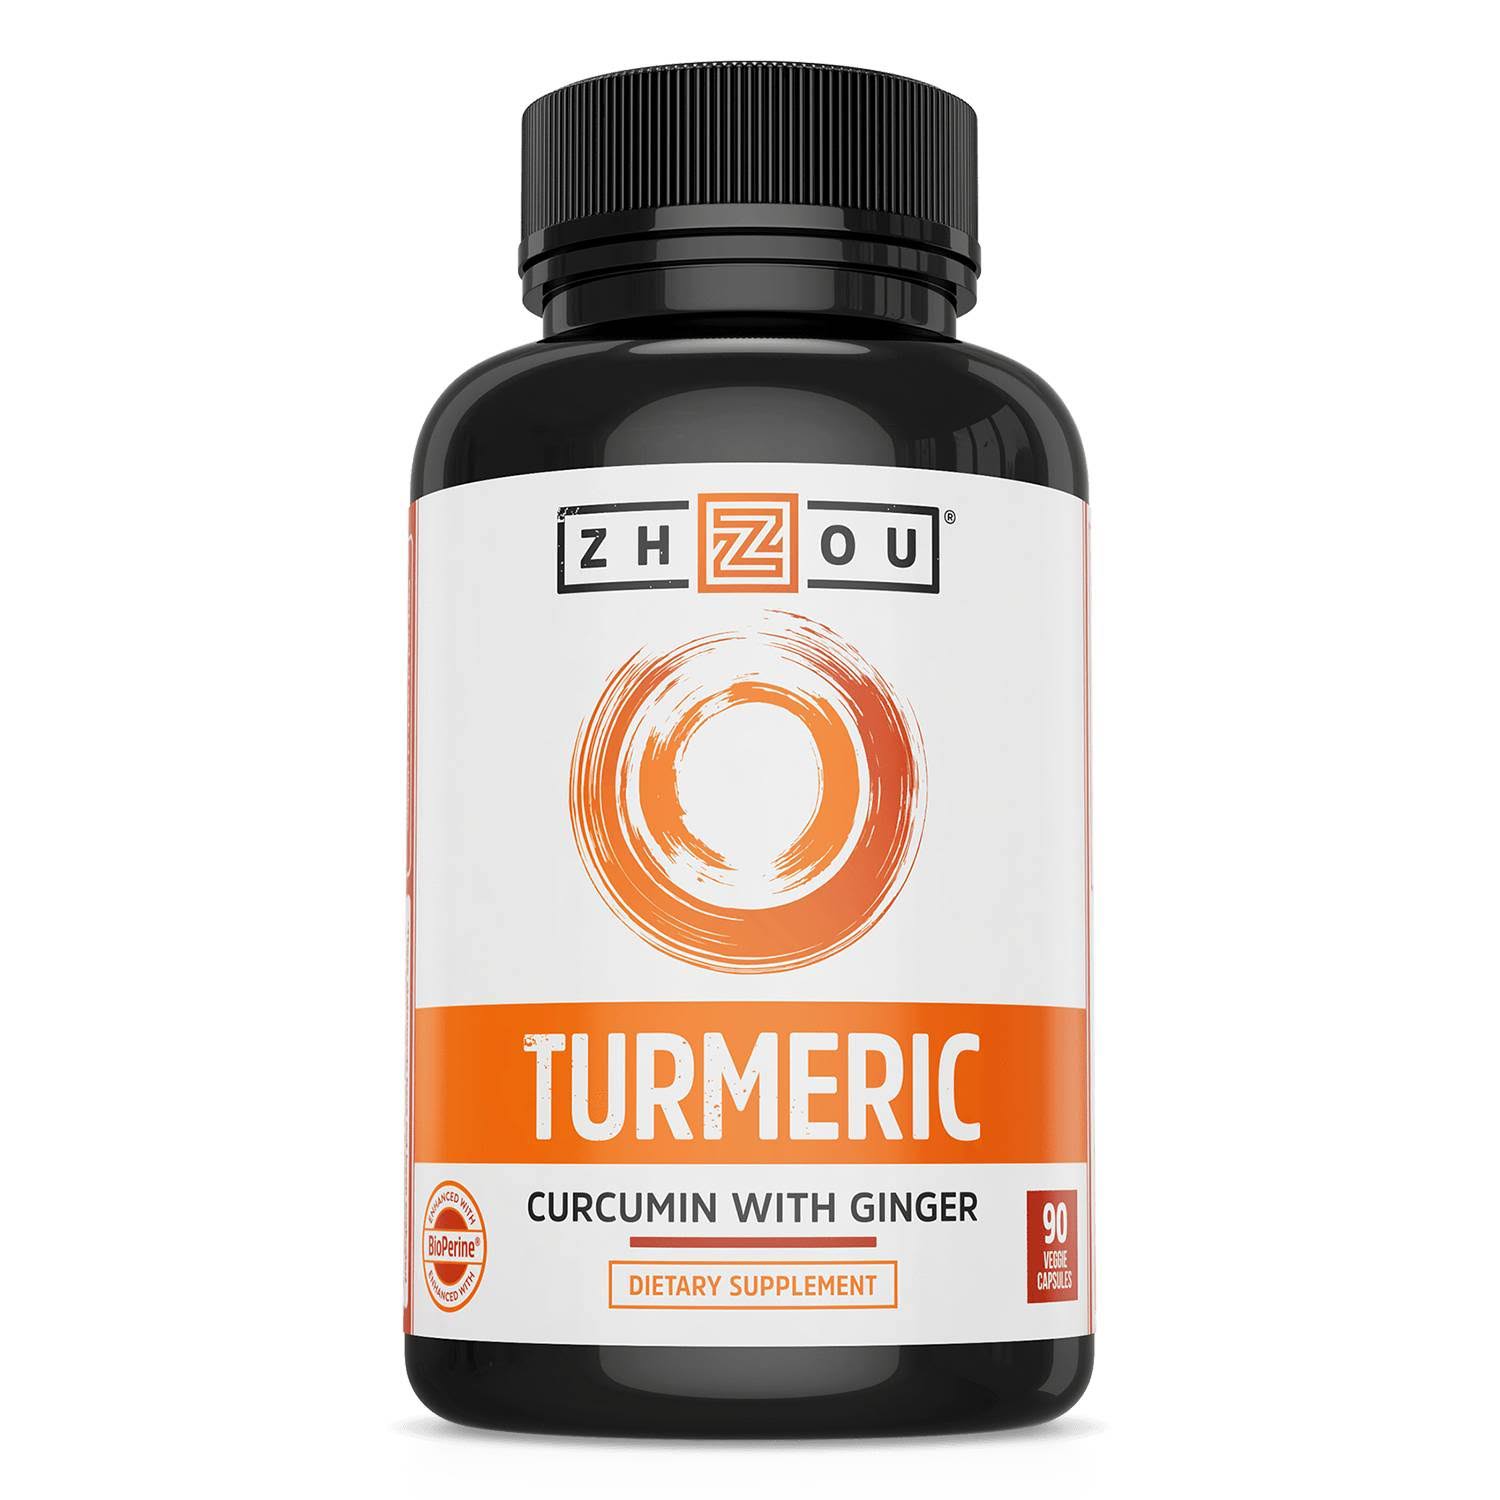 Zhou Turmeric Curcumin with Ginger Supplement - 90ct